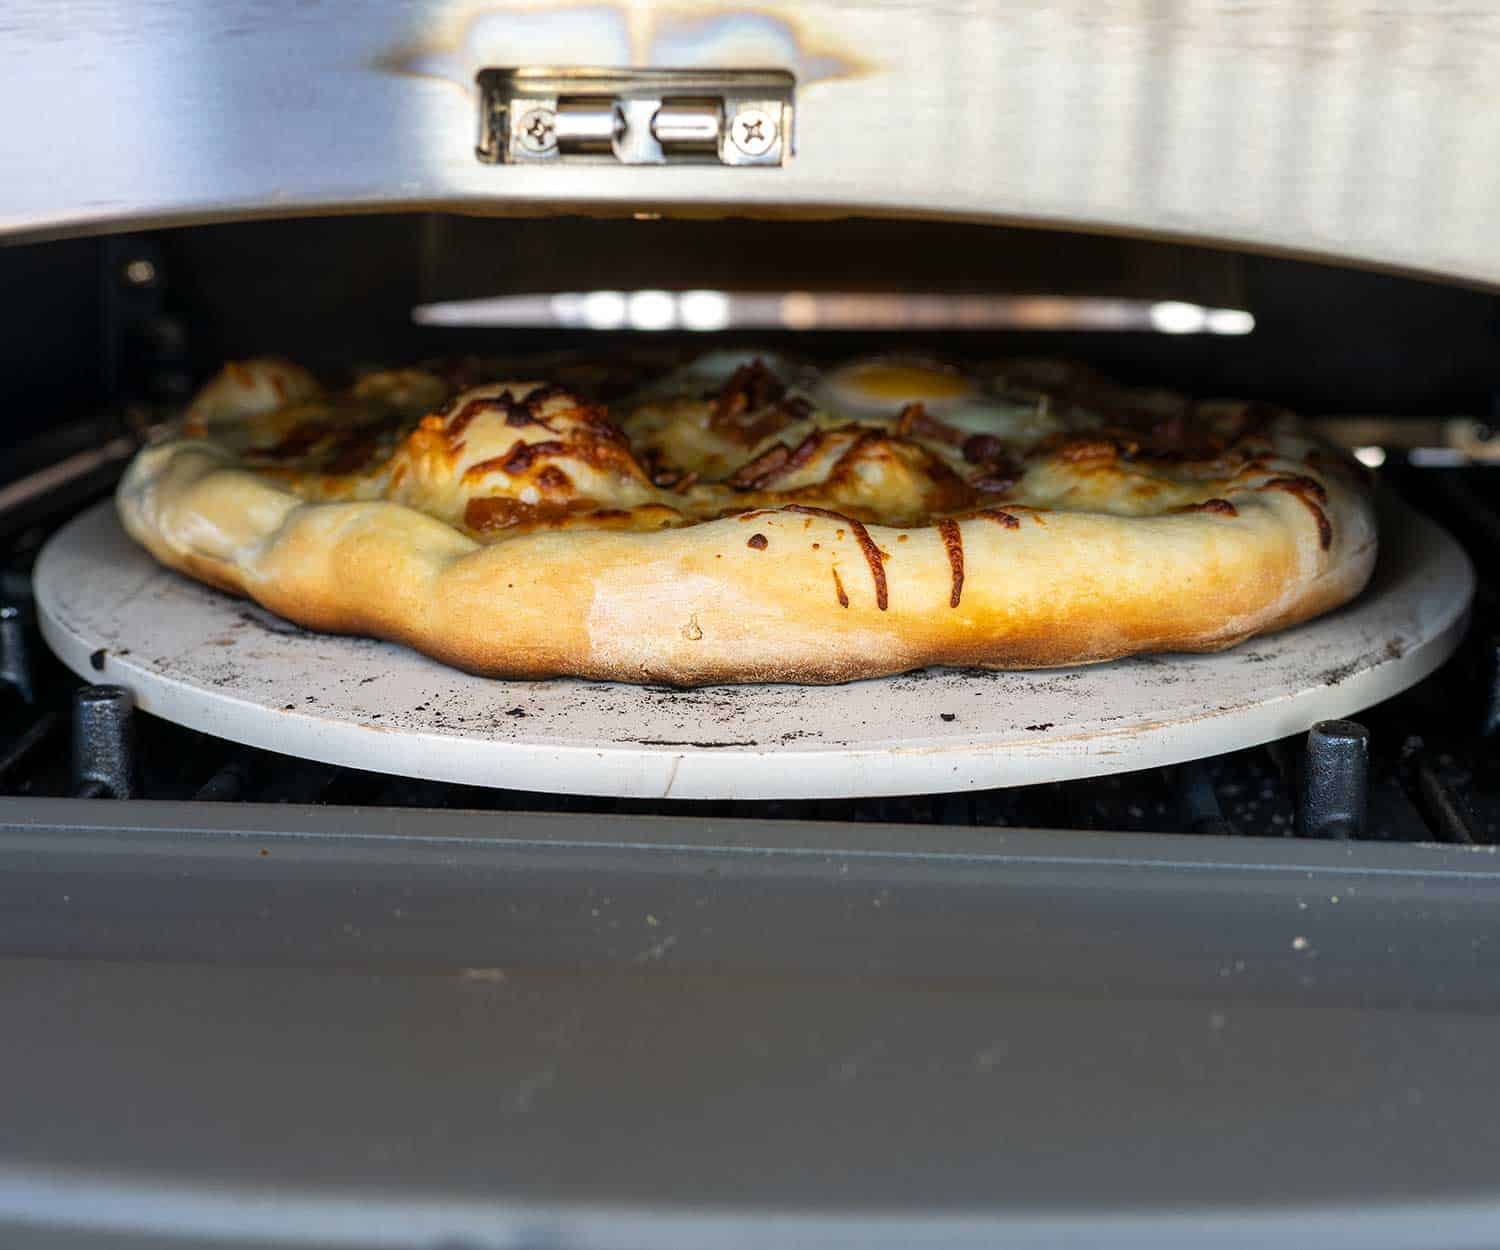 Cuisinart 3-in-1 Pizza Oven Plus with pizza on stone.